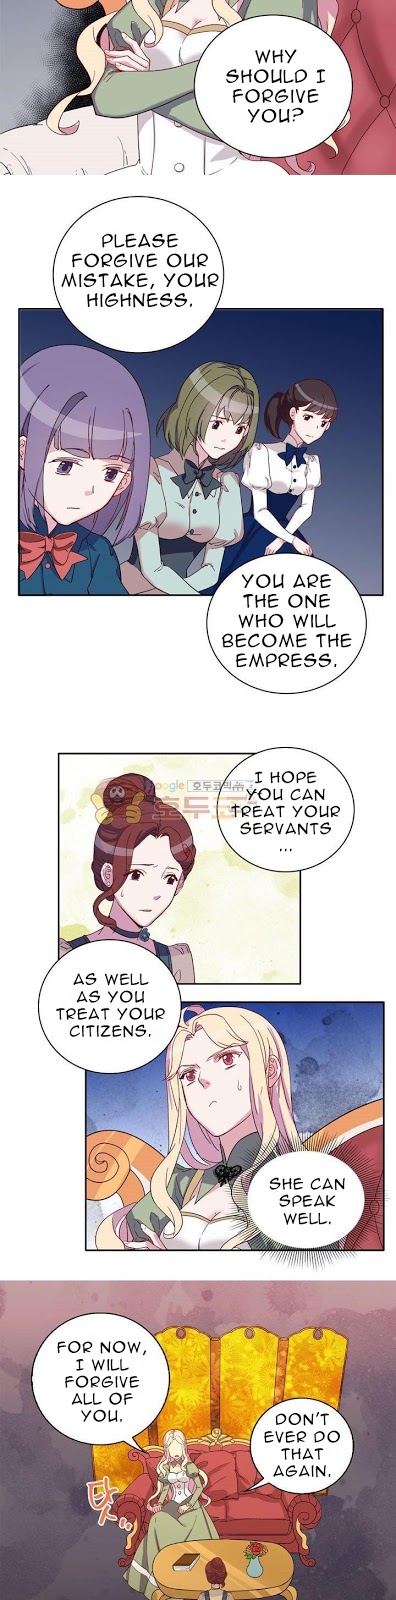 The Justice of Villainous Woman ch.11